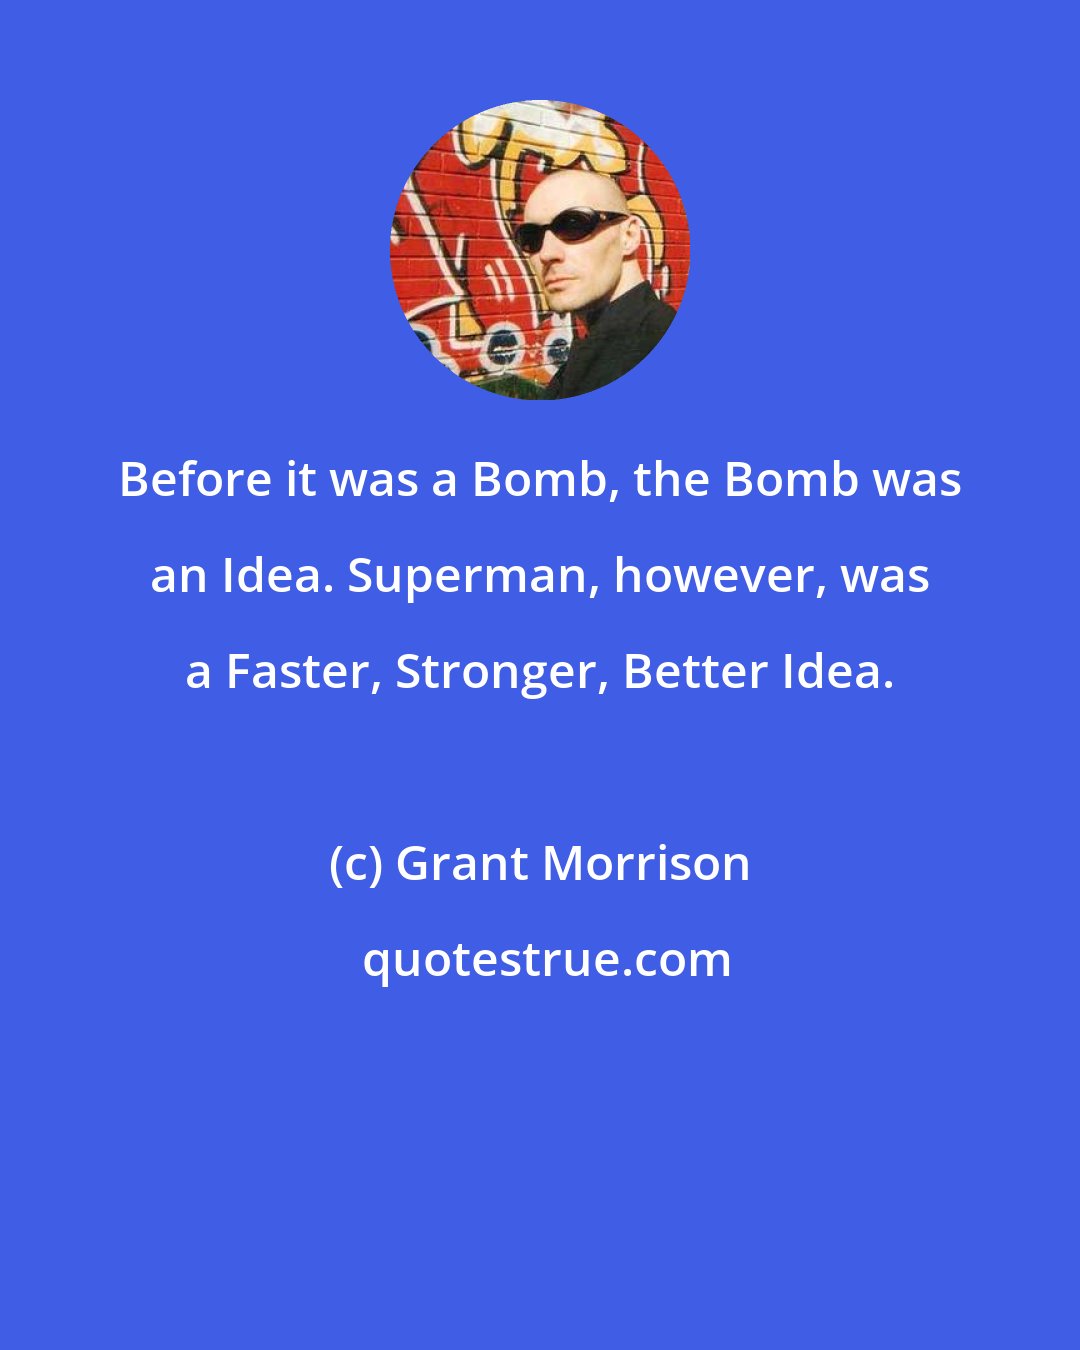 Grant Morrison: Before it was a Bomb, the Bomb was an Idea. Superman, however, was a Faster, Stronger, Better Idea.